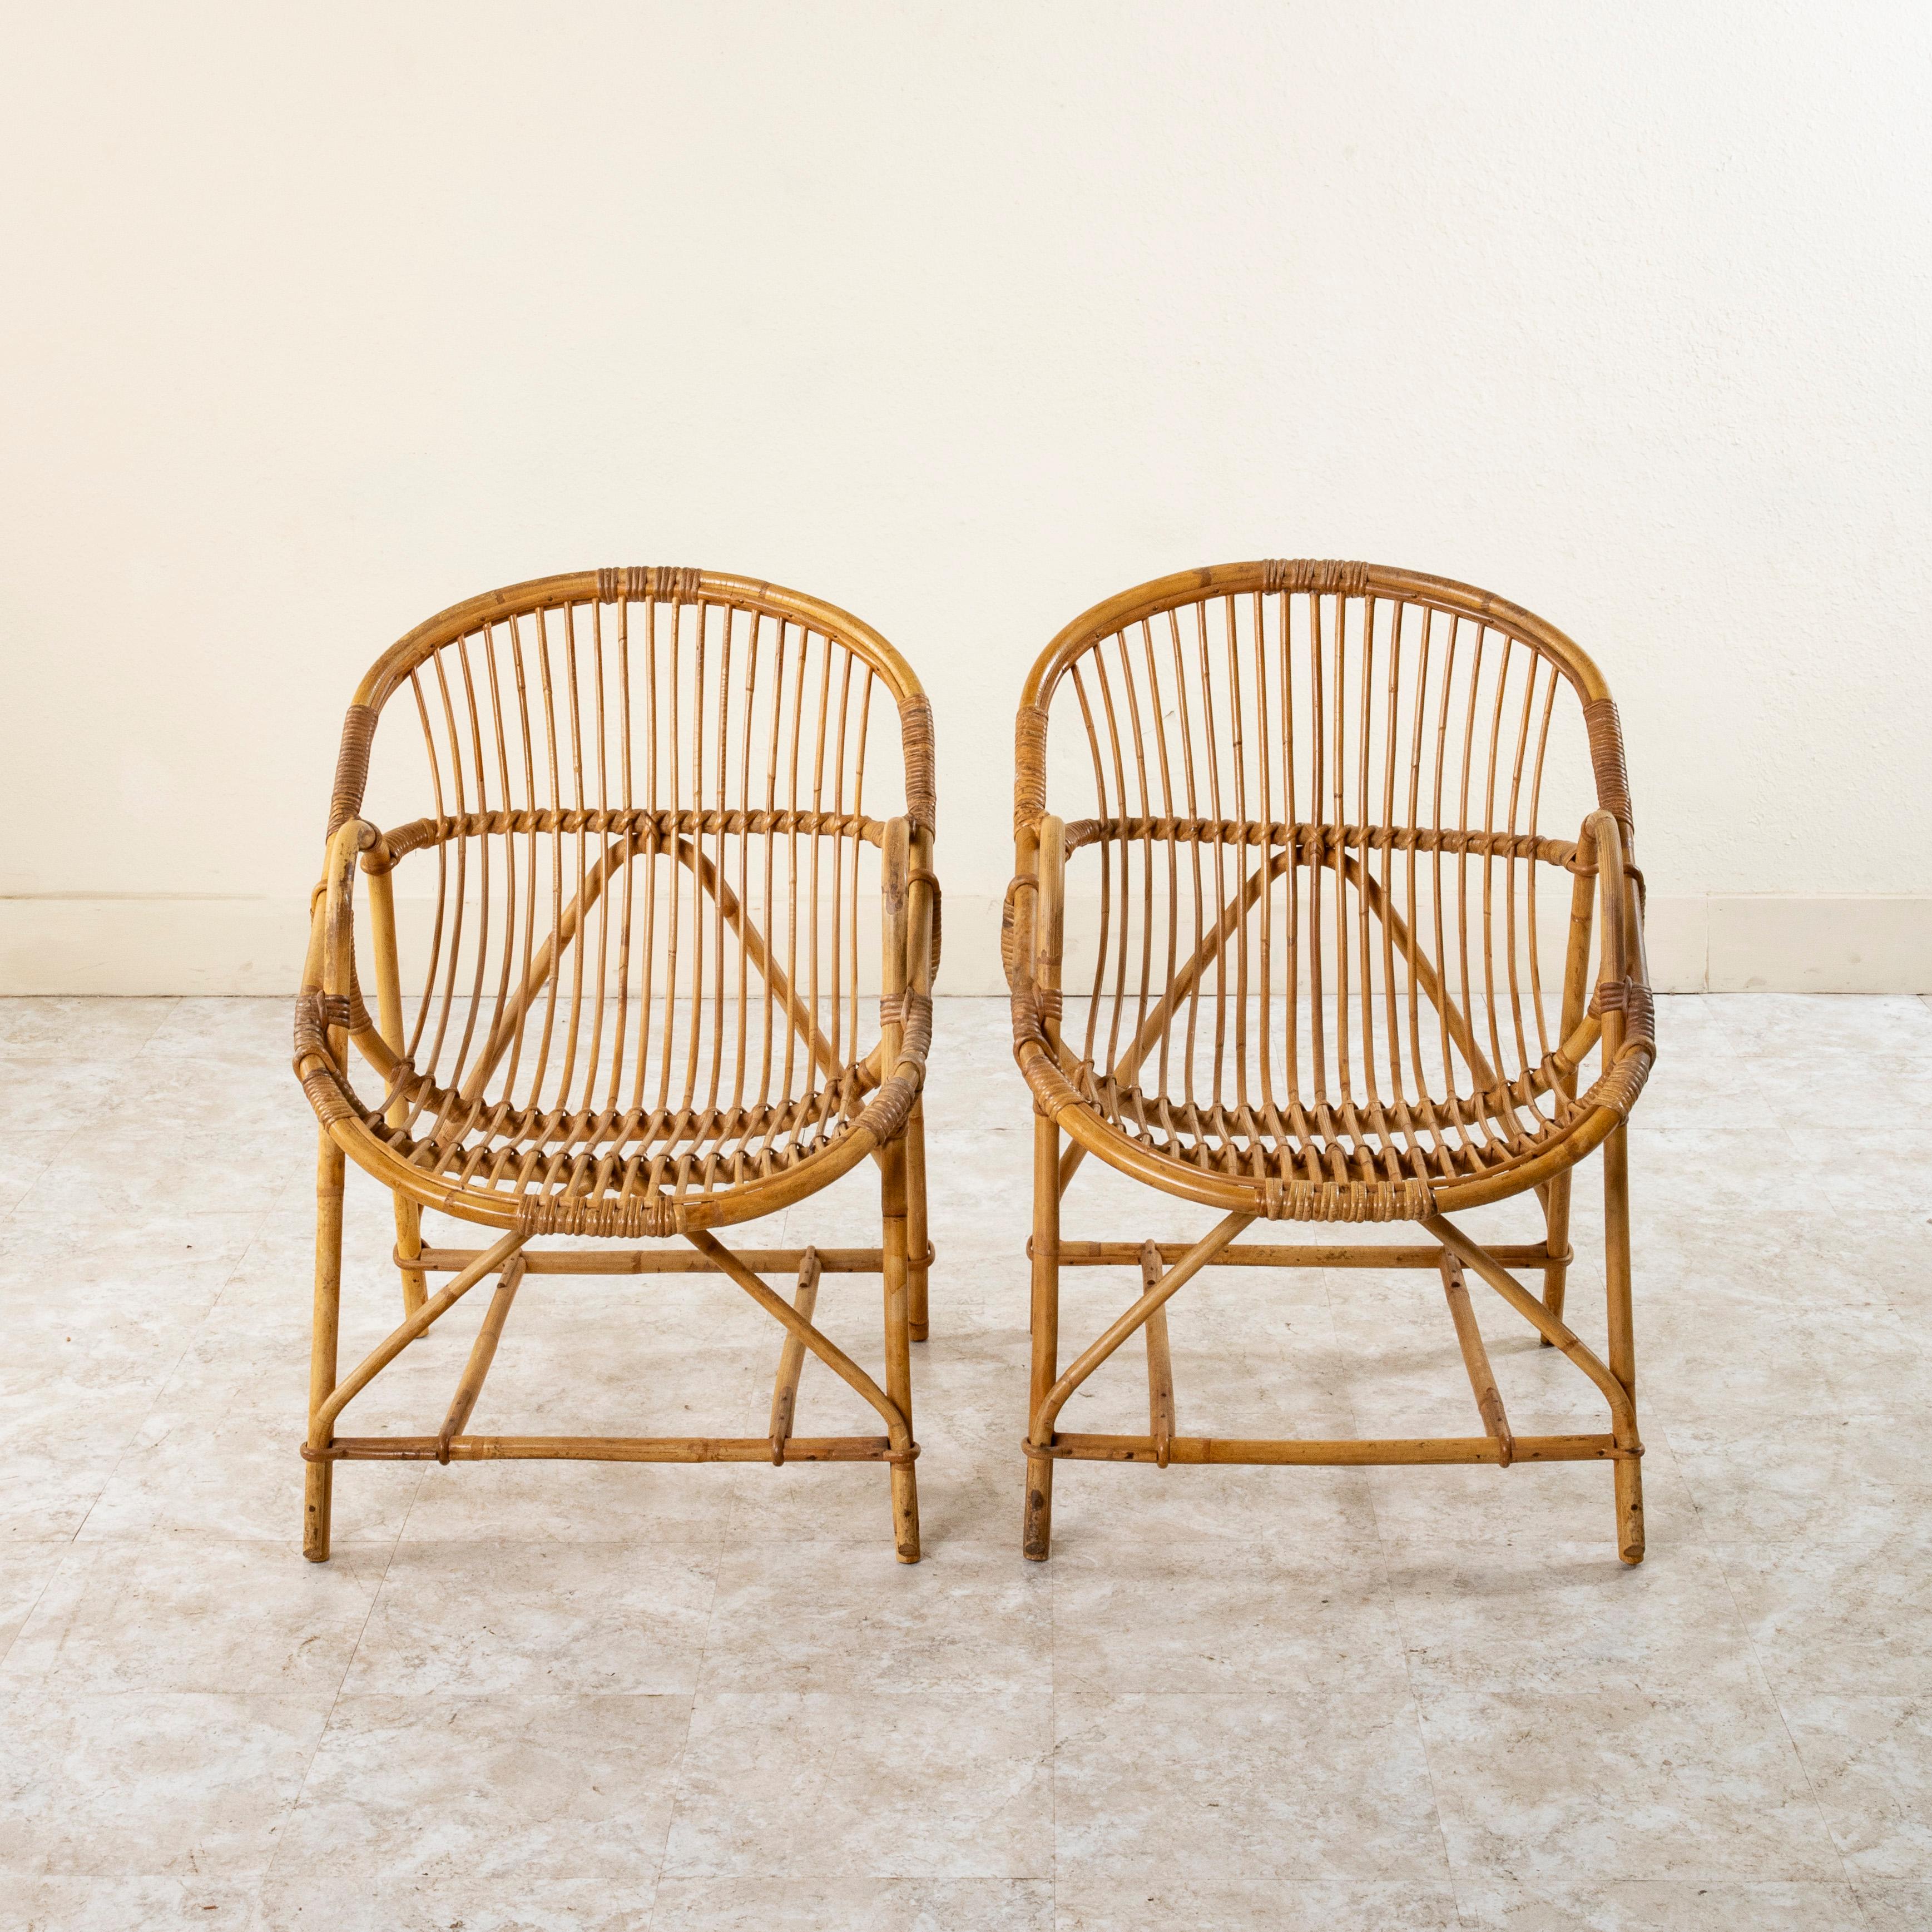 This pair of mid-century French rattan armchairs features bucket shaped seats and backs. The seats rest on curved legs that arch to create armrests. The legs are joined by supports at the front and back and are secured with a double stretcher in